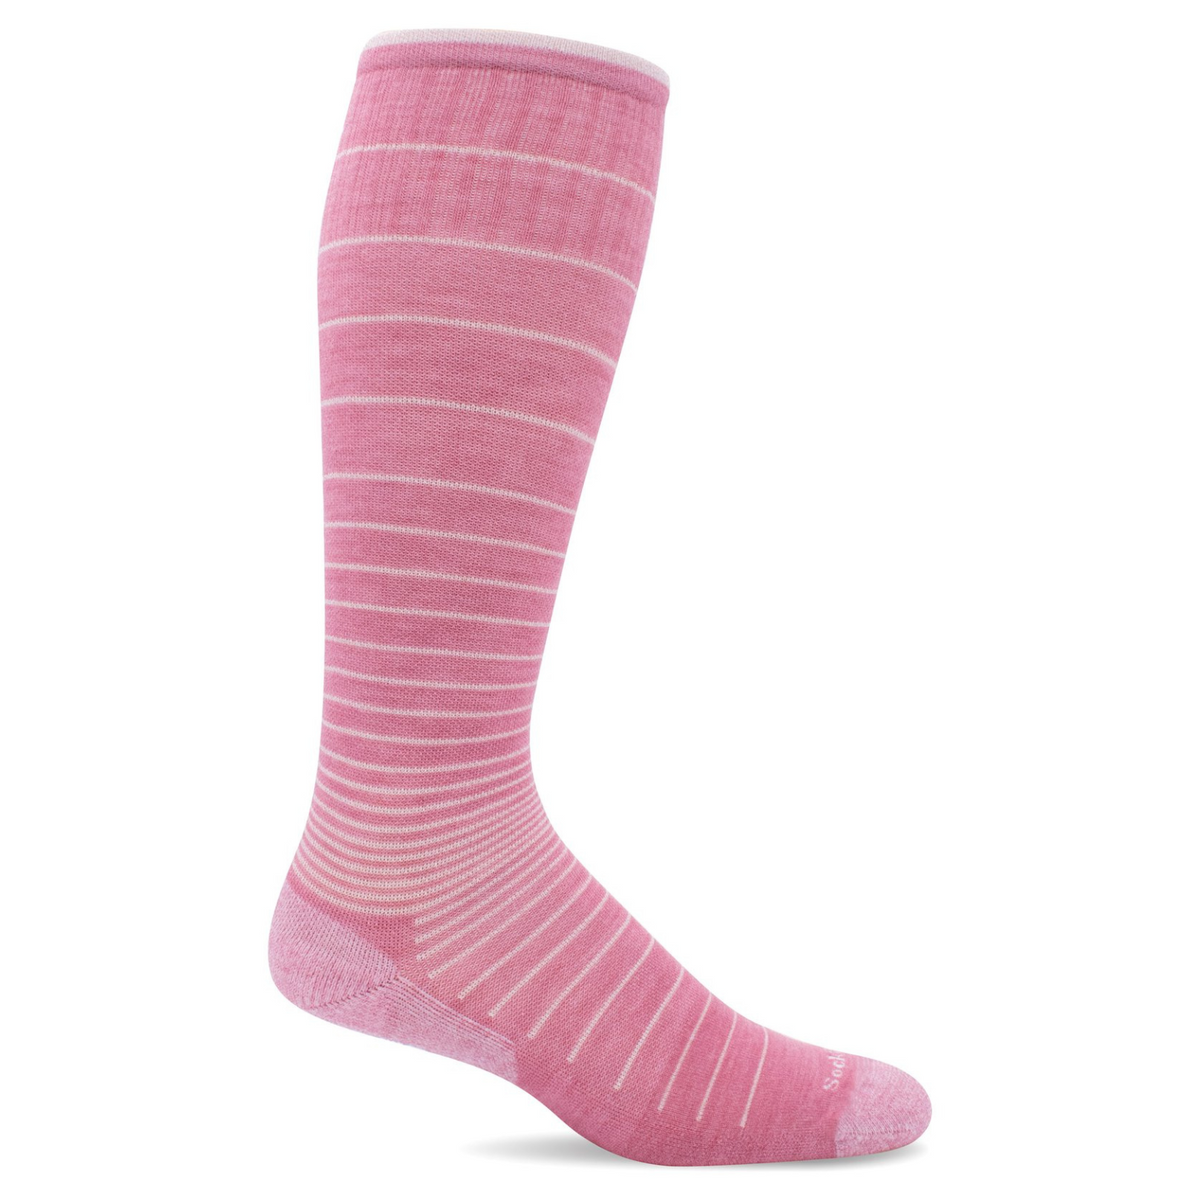 Sockwell Circulator moderate graduated compression (15-20 mmHg) knee high women&#39;s sock in pink sparkle